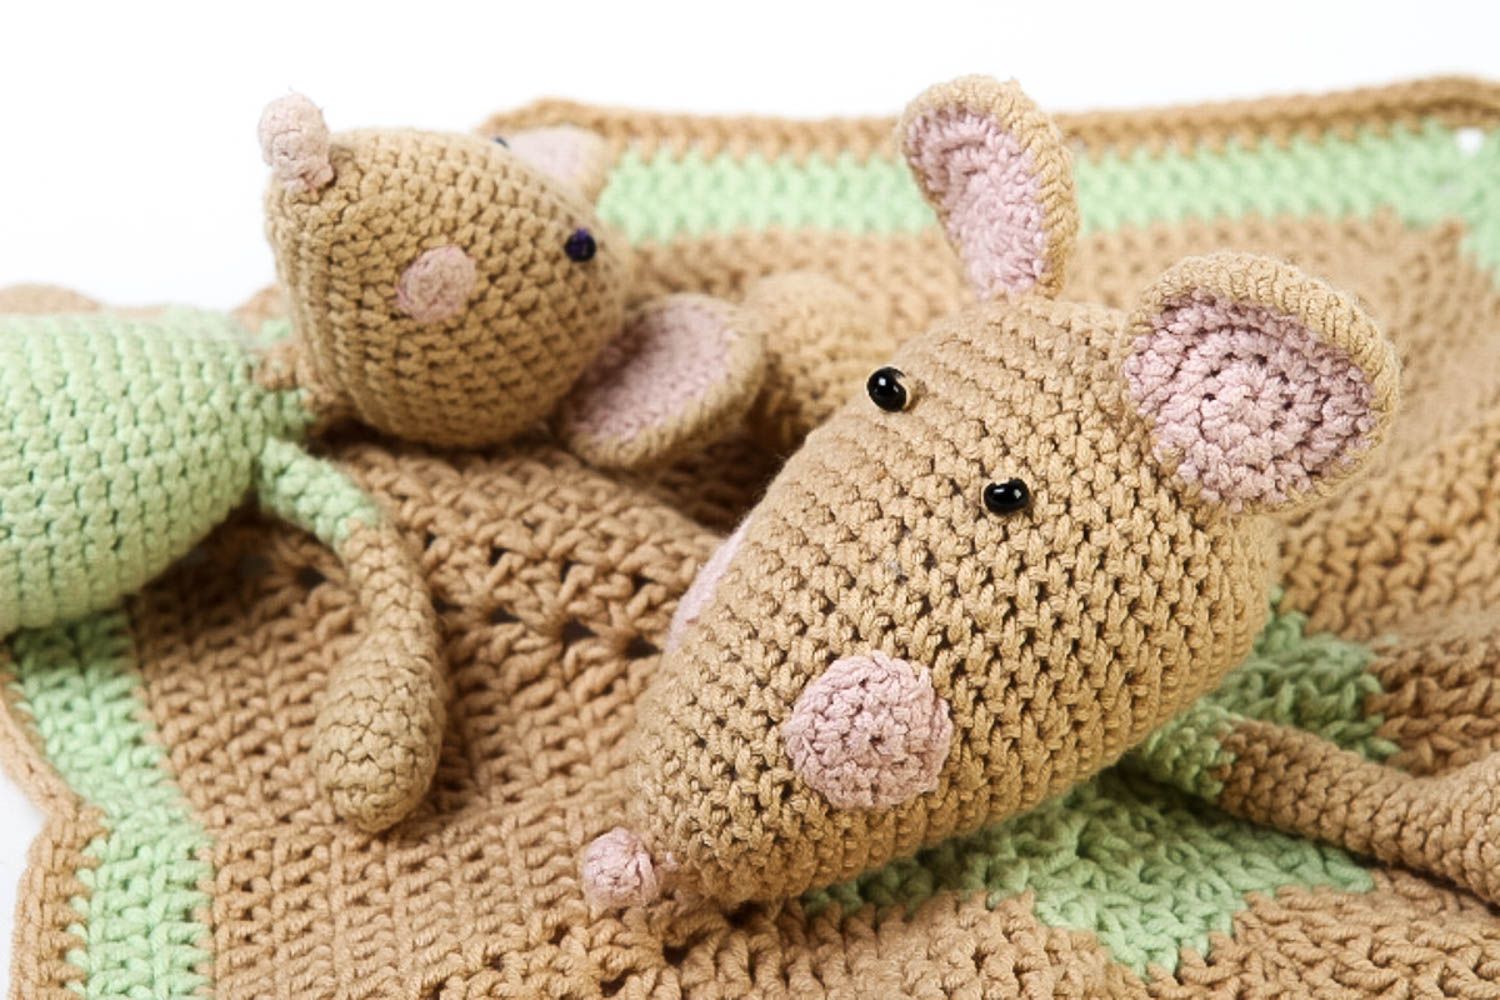 Handmade crocheted soft toy for babies nursery decor ideas soft toy for children photo 3